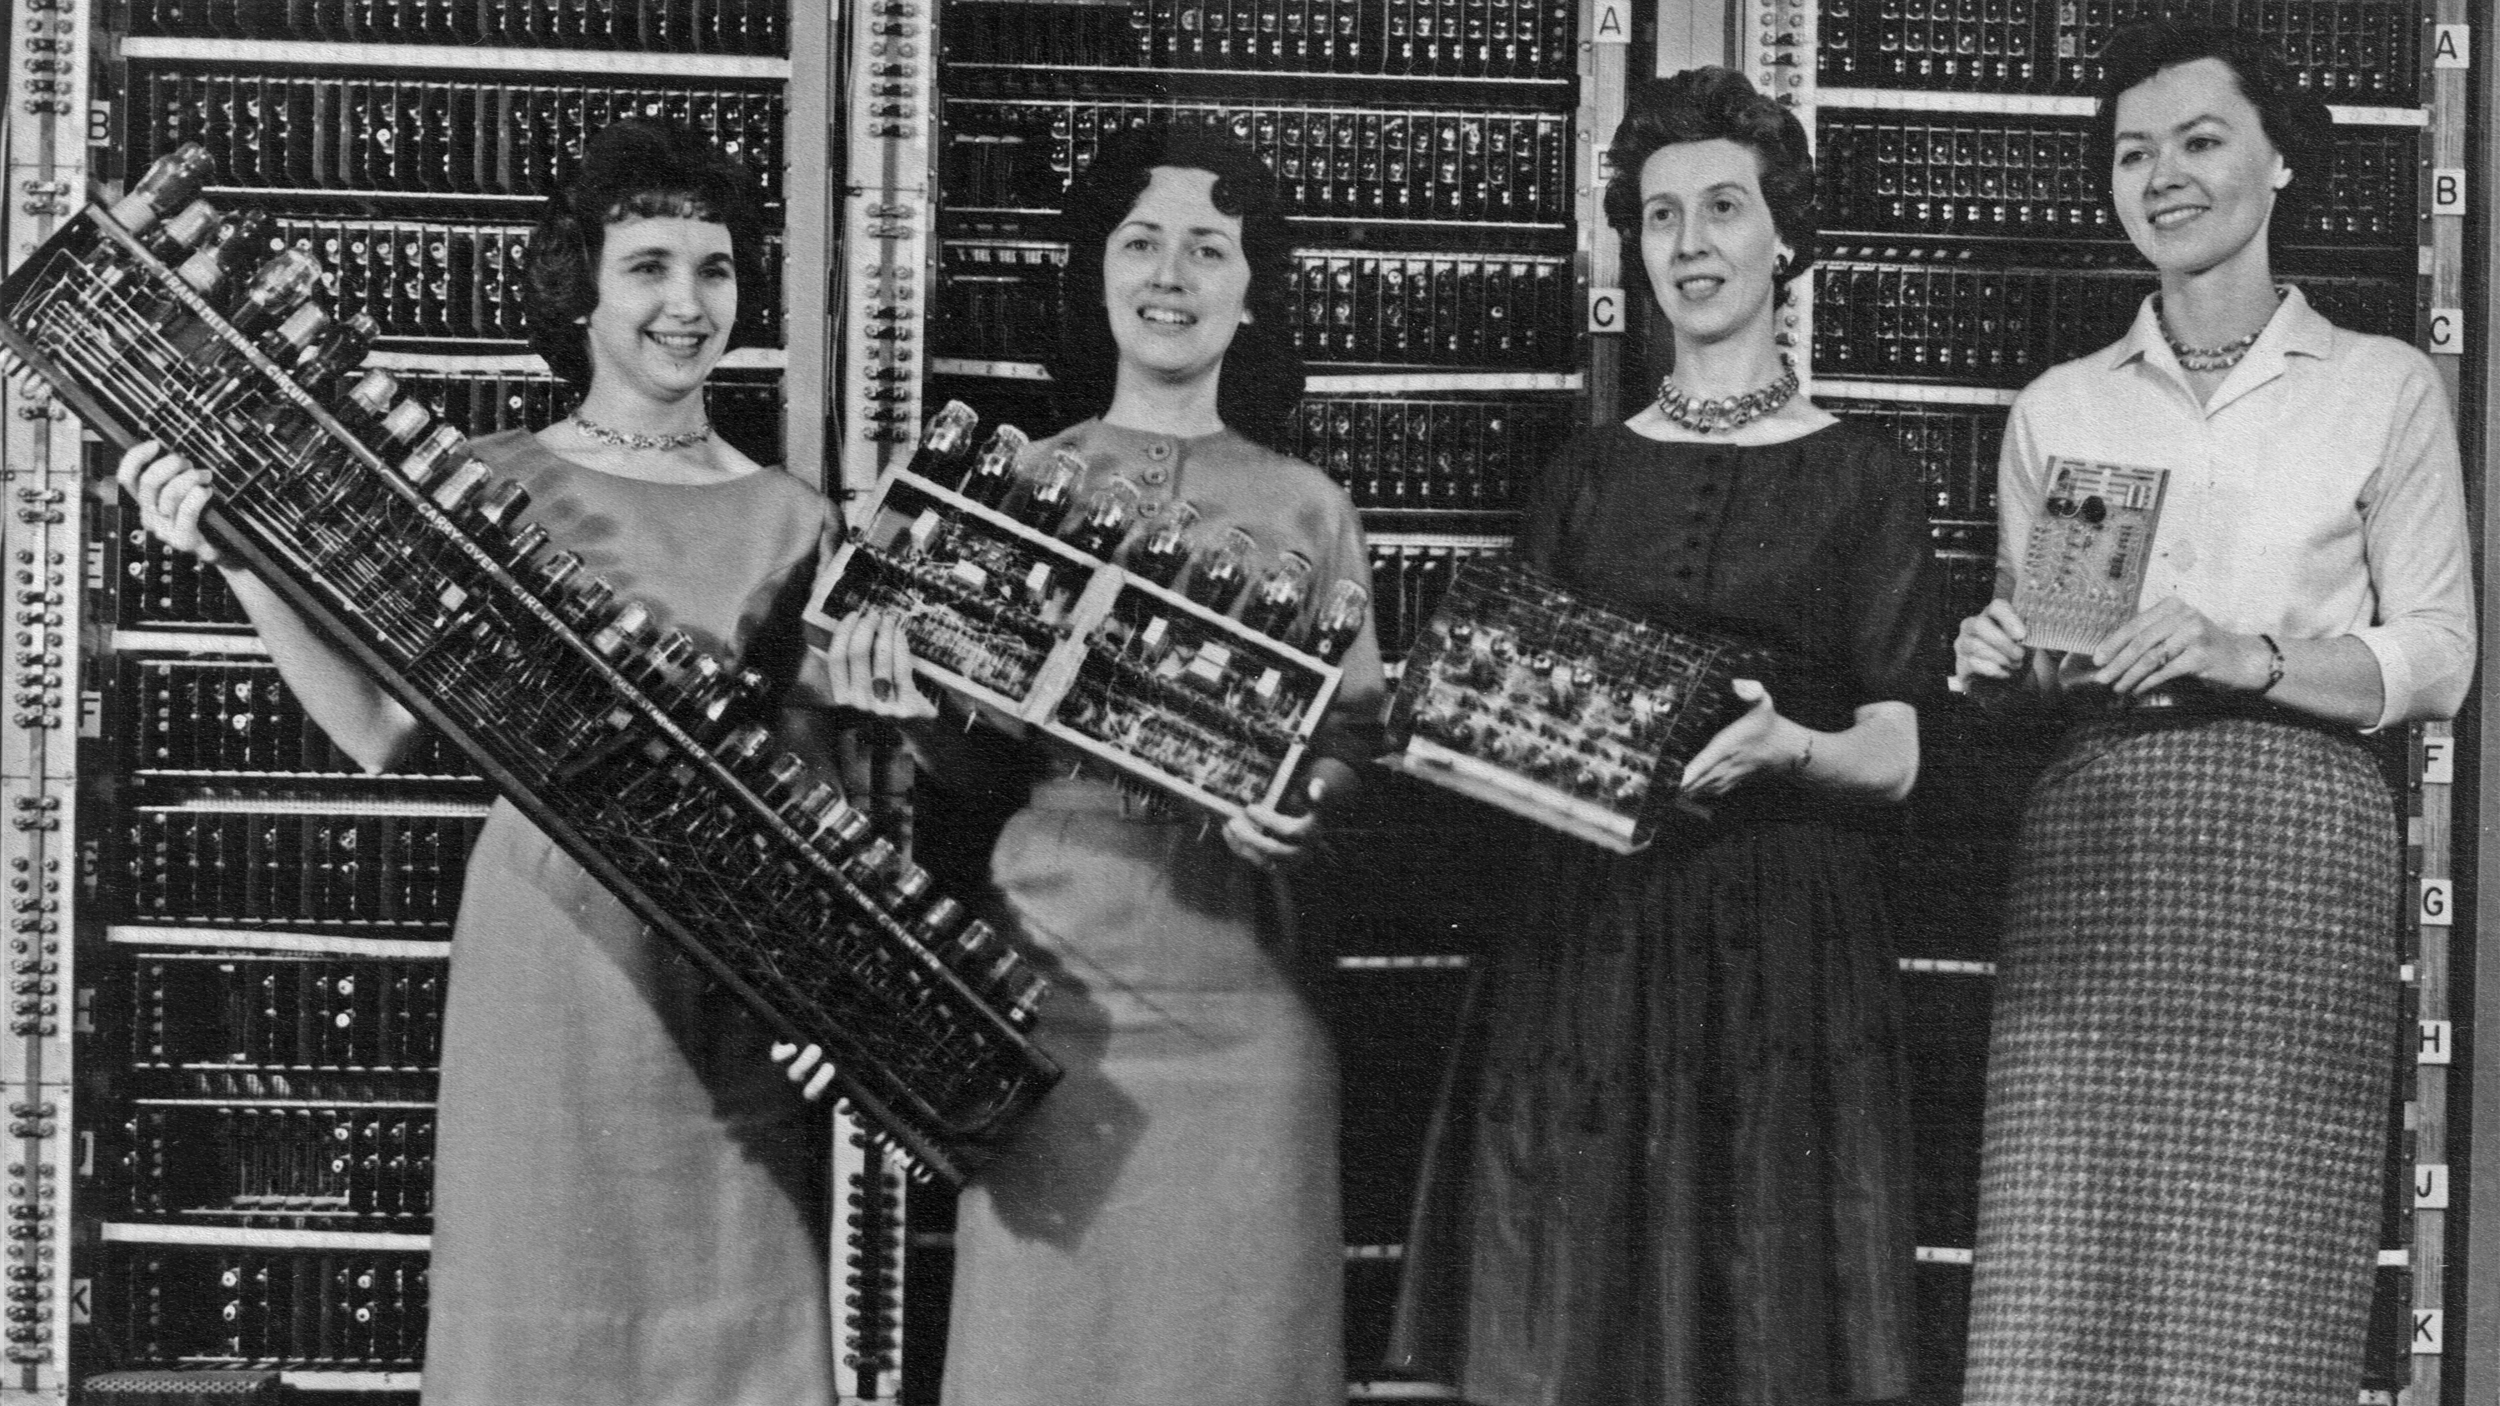 A group of women adopting new technologies.